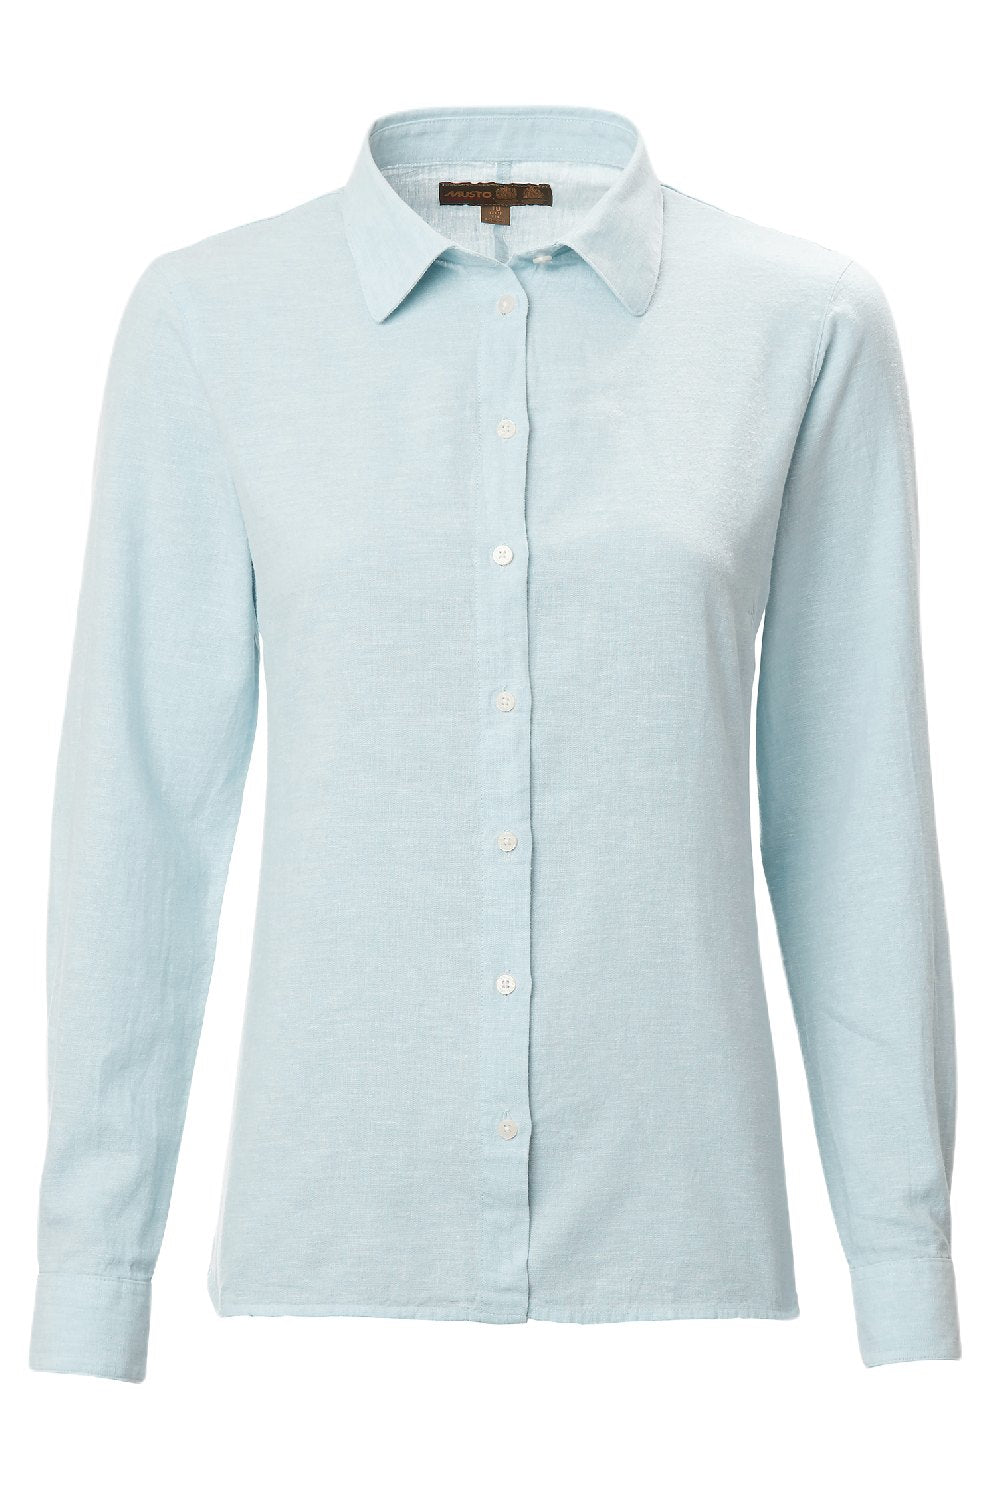 Musto Ladies Country Linen Shirt in Pale Blue